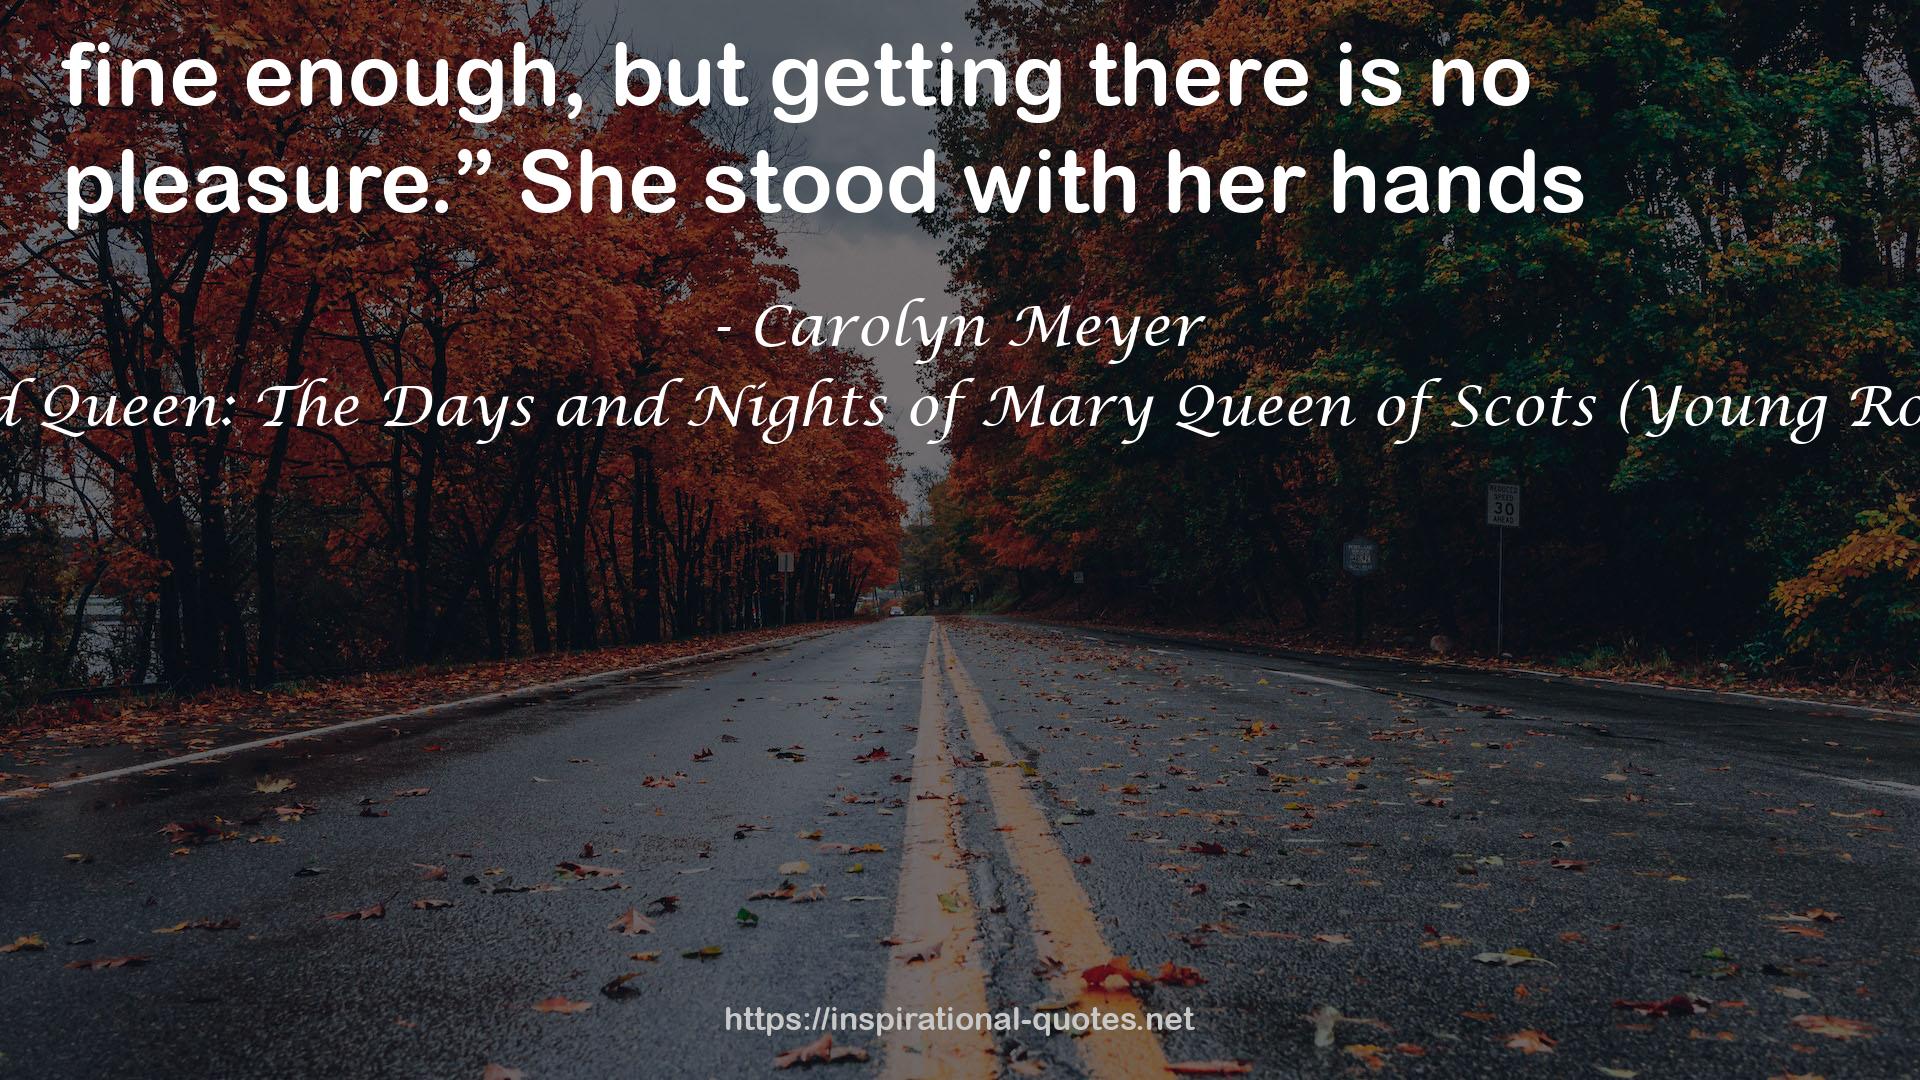 The Wild Queen: The Days and Nights of Mary Queen of Scots (Young Royals, #7) QUOTES